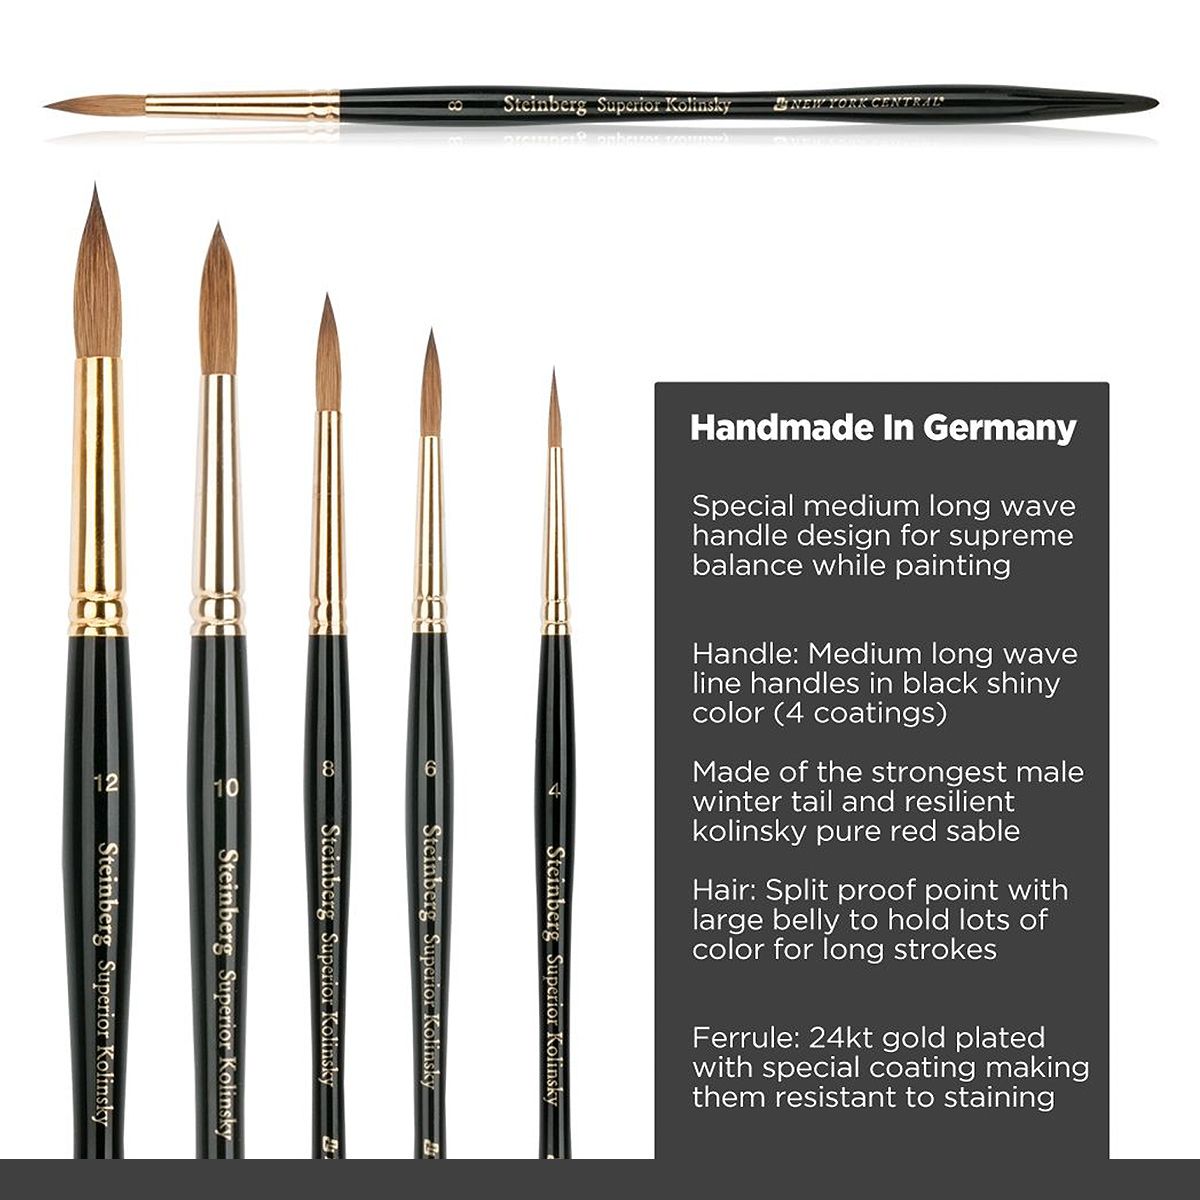 Made exclusively by the very best master brush makers in German